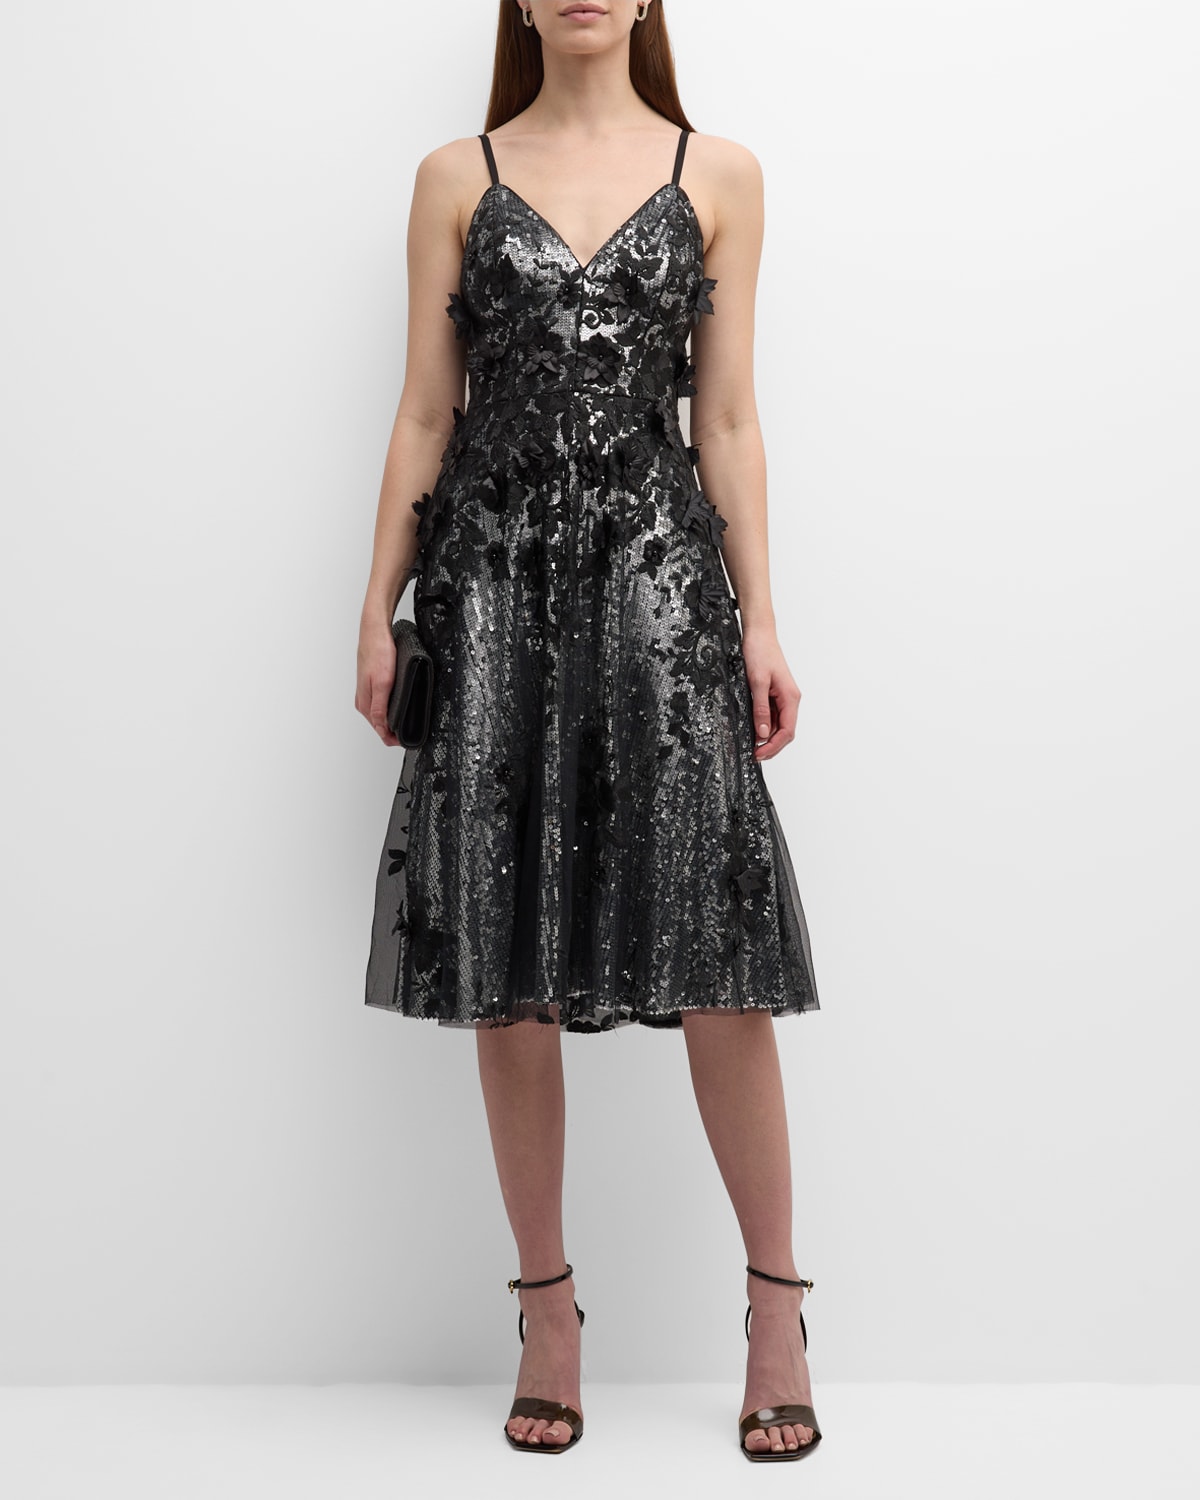 Dress The Population Black Label Tahani Floral-embroidered Sequin Midi Dress In Silver-black